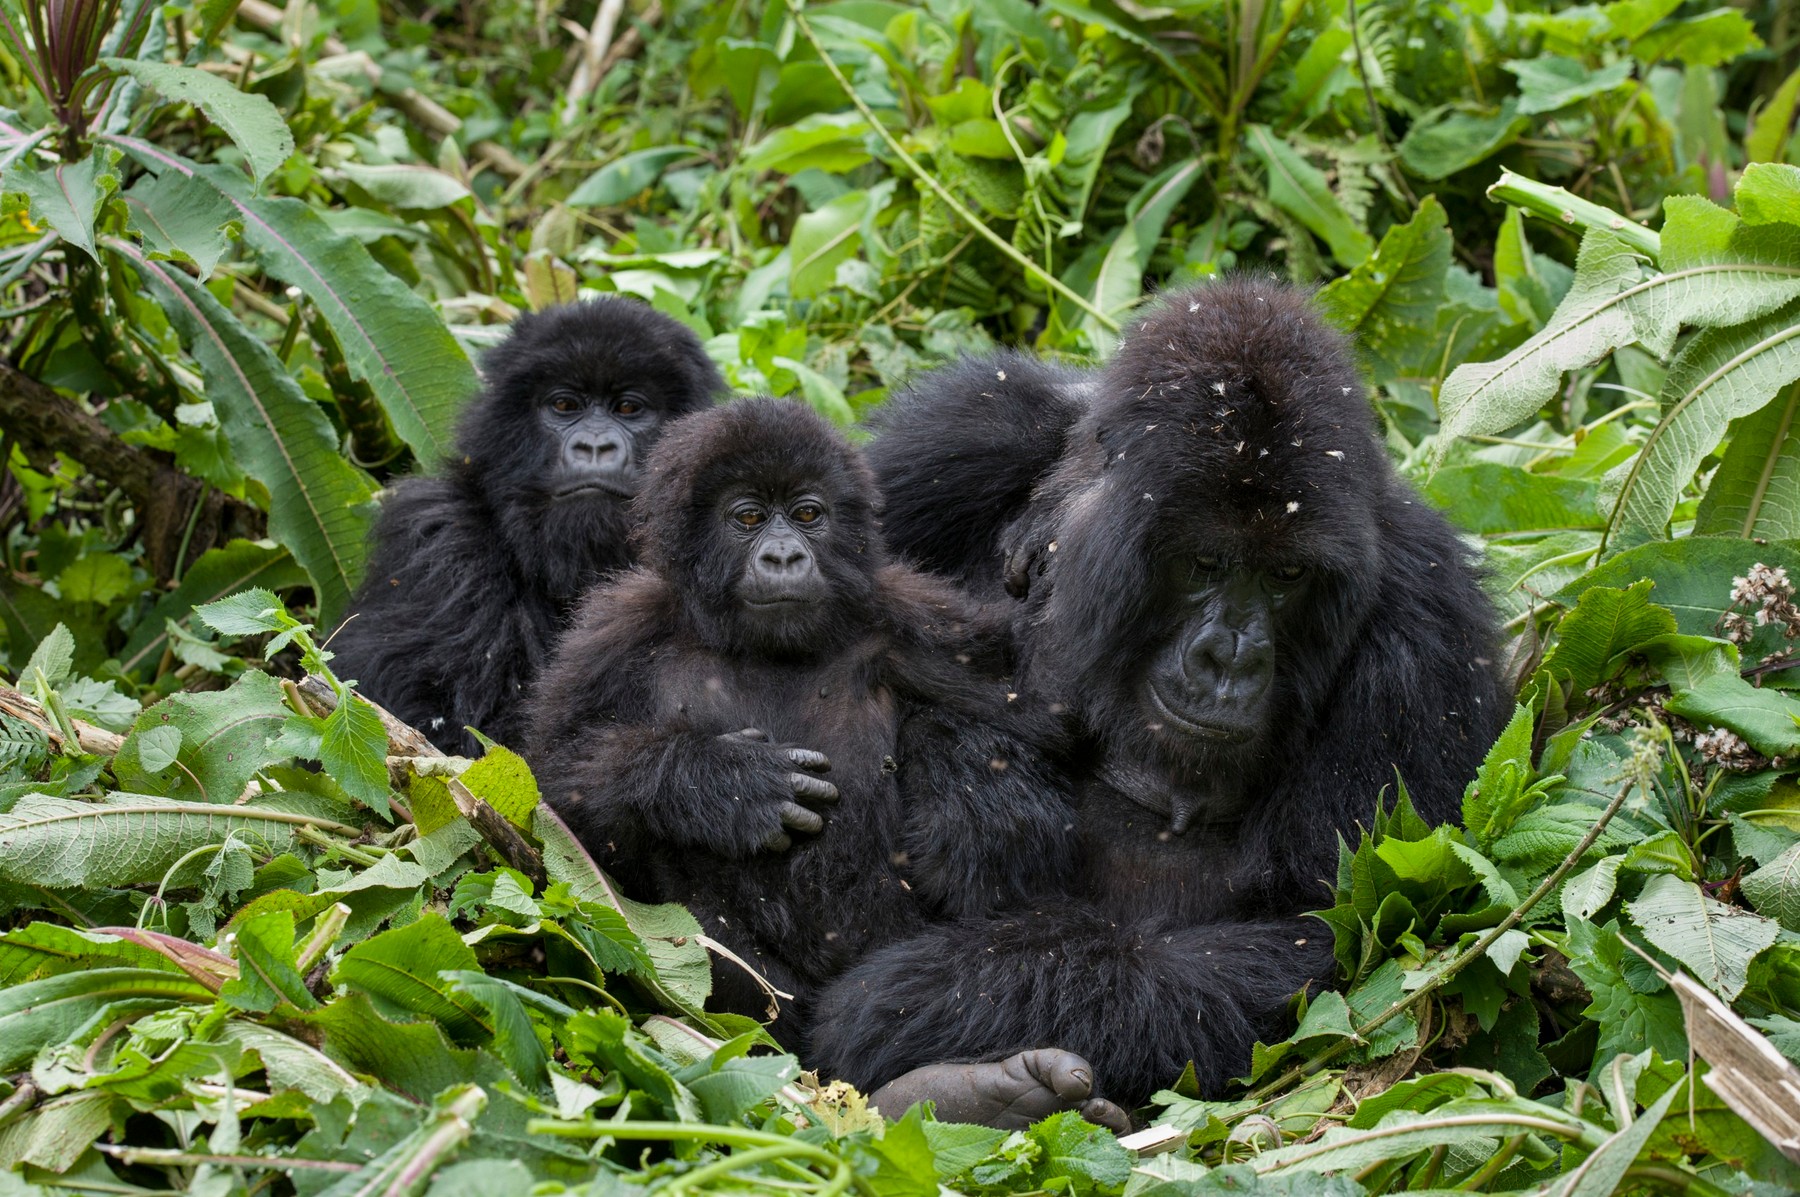 A family of four mountain gorillas, including a mother and her young offspring, sitting in a nest made of branches and leaves in a lush forest setting. The mother gorilla is holding her baby close to her chest, while the two other gorillas sit nearby. The forest is green and dense, with a canopy of leaves and vines hanging from above.